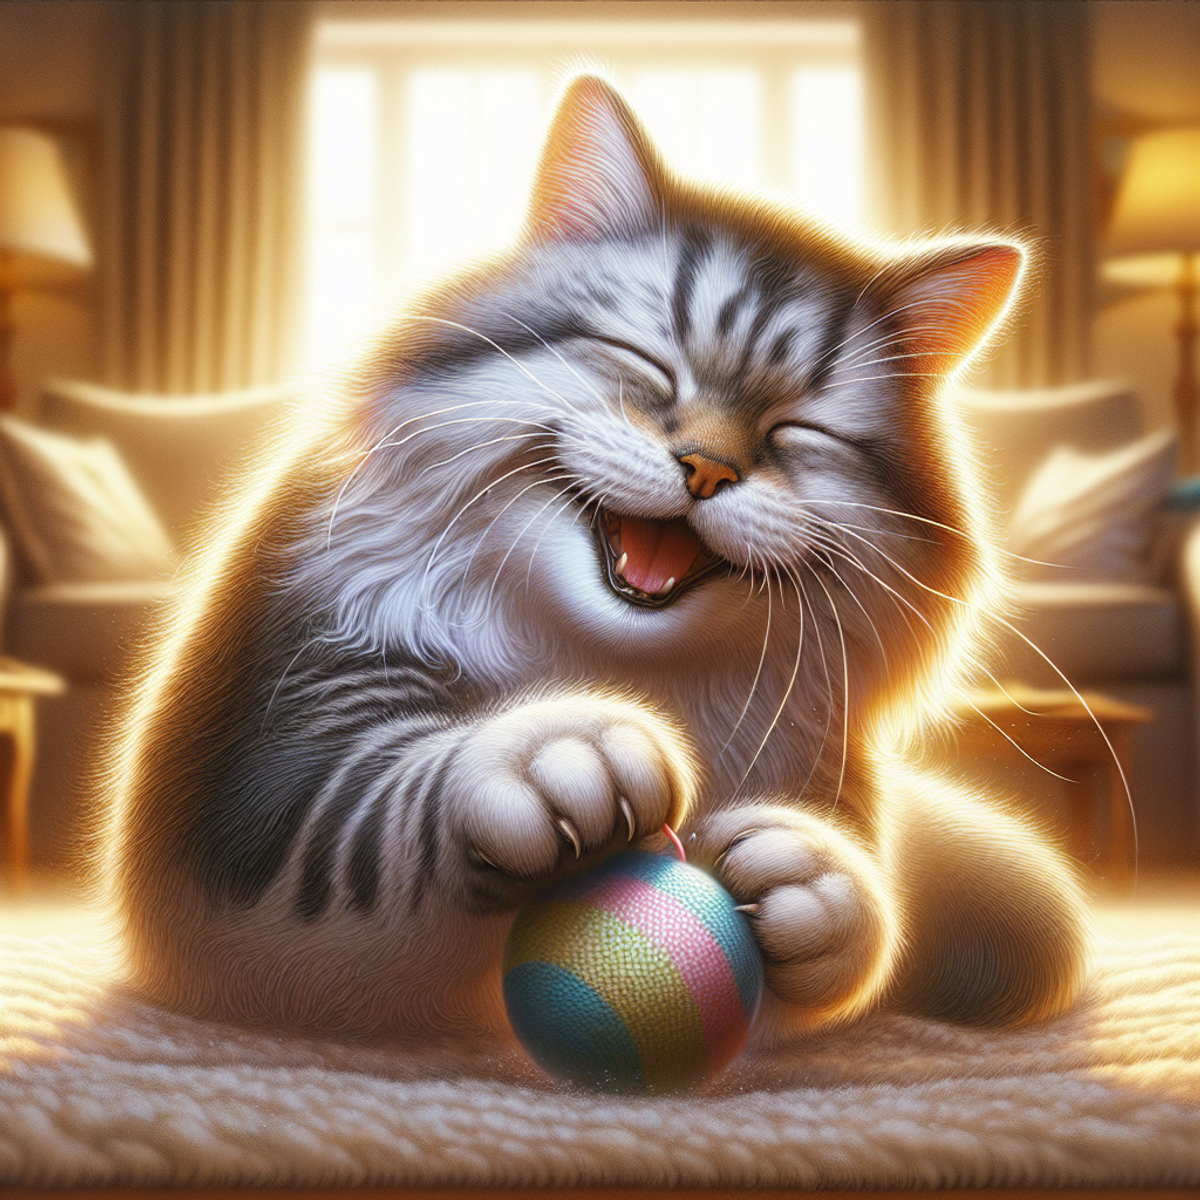 Elderly grey and white cat playing with a jingle ball toy in a cozy living room.